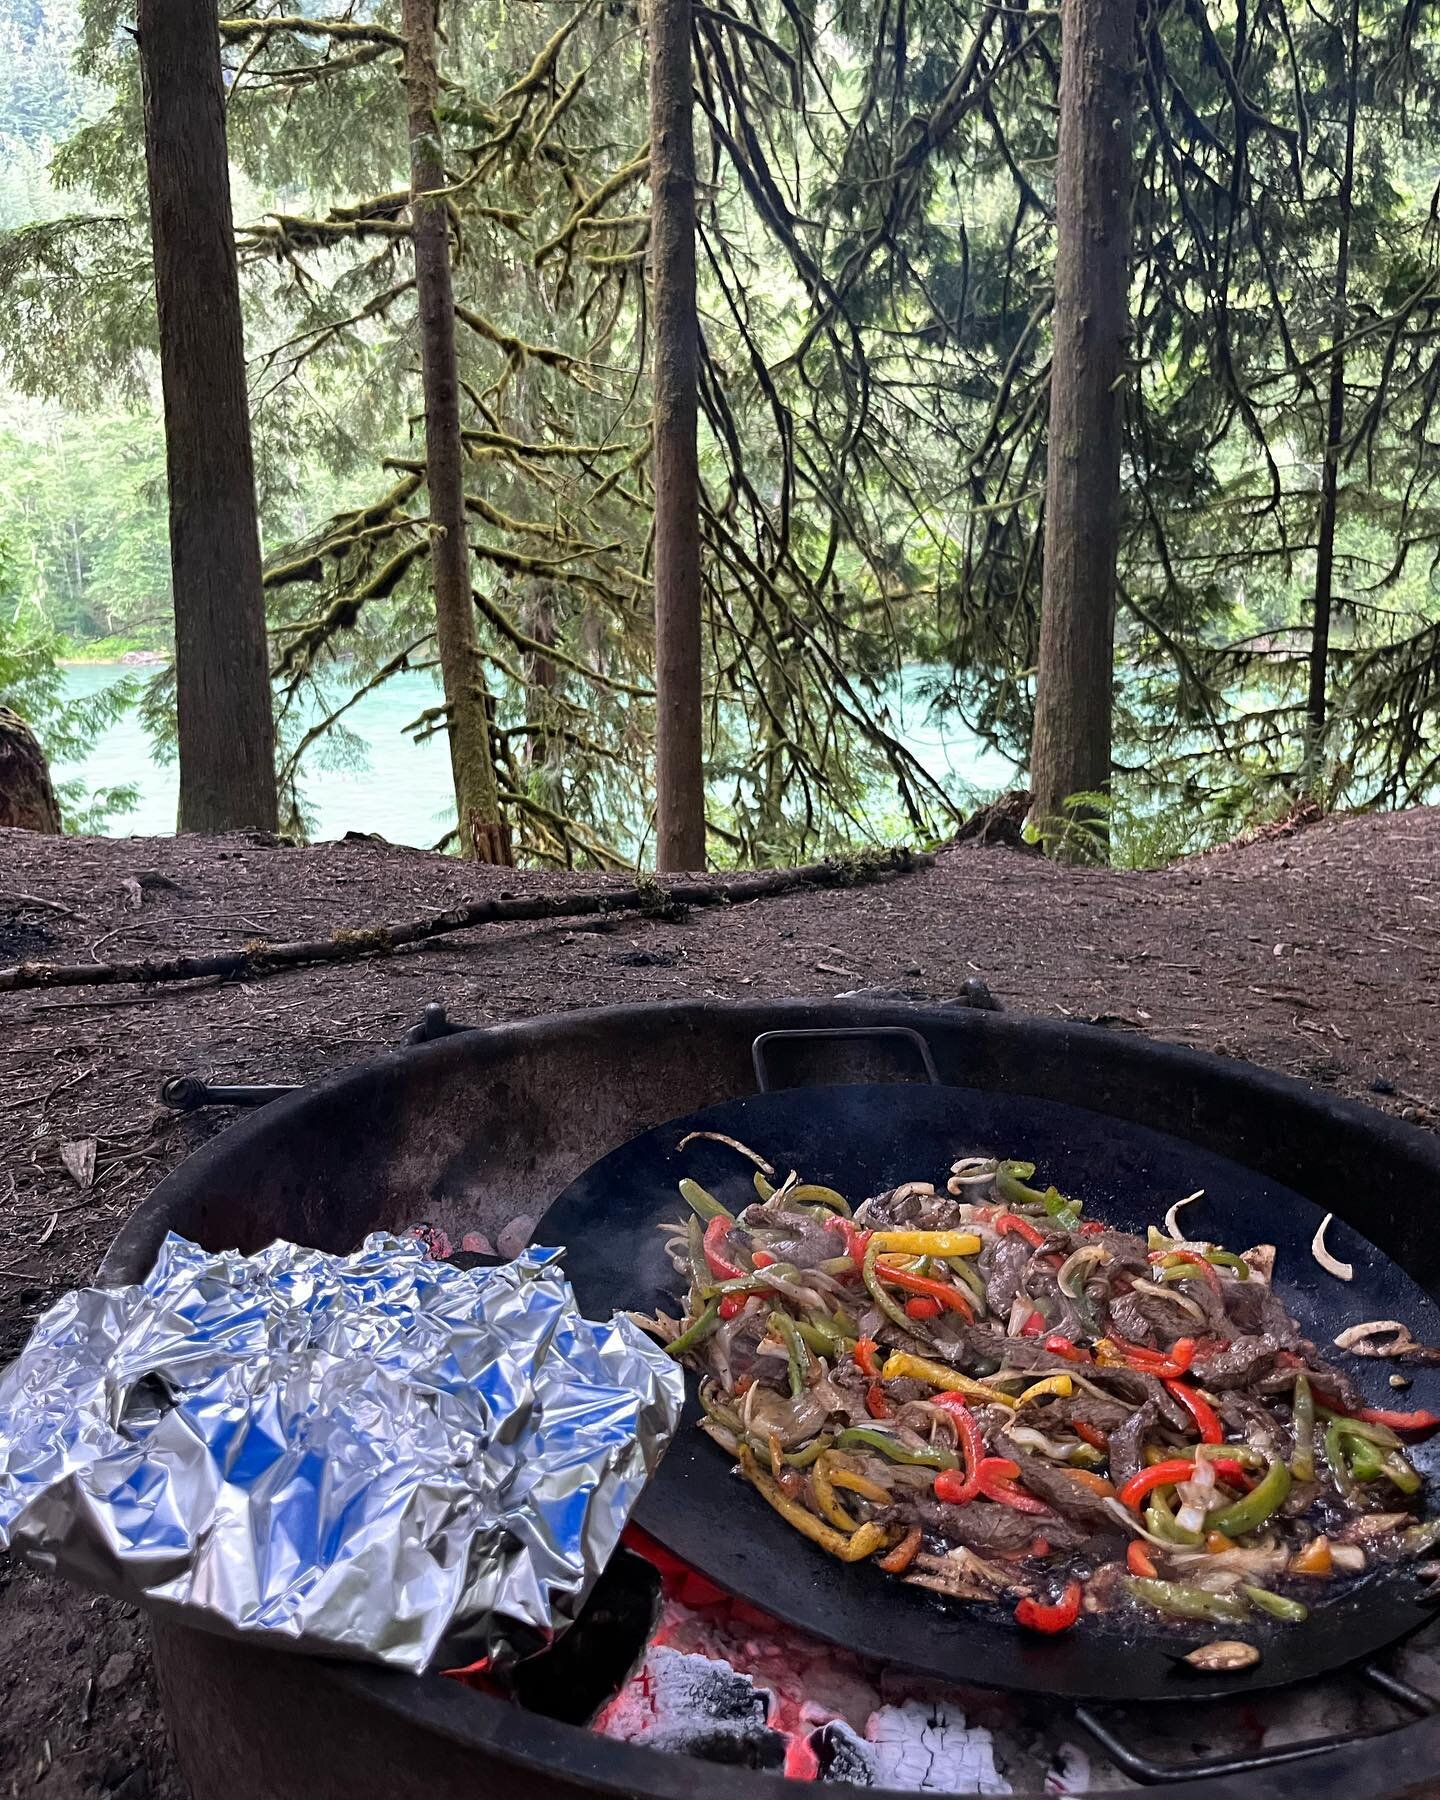 Food with a view! Join us for a two day adventure in the North Cascades 🌿🏔

Photos taken on Sauk-Suiattle land

#NorthCascadesNationalPark #TriadRiverTours #WhitewaterRafting #Camping